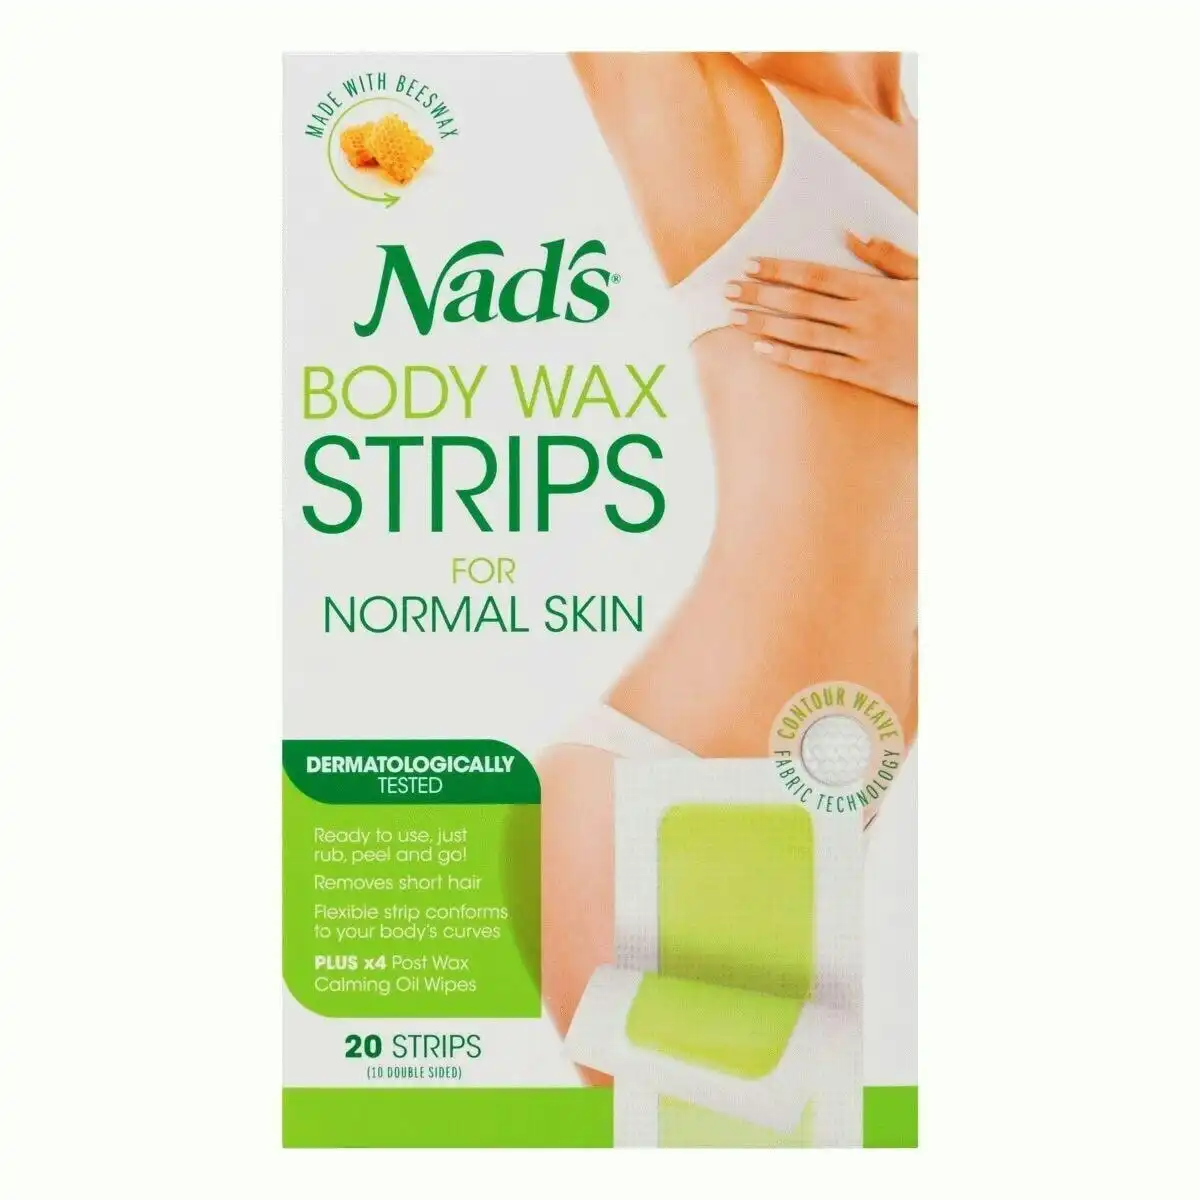 Nads - Nad's Nads Nad's Body Strips Large Pk 20 Wax For Normal Skin - X Hair Rem Strip Women